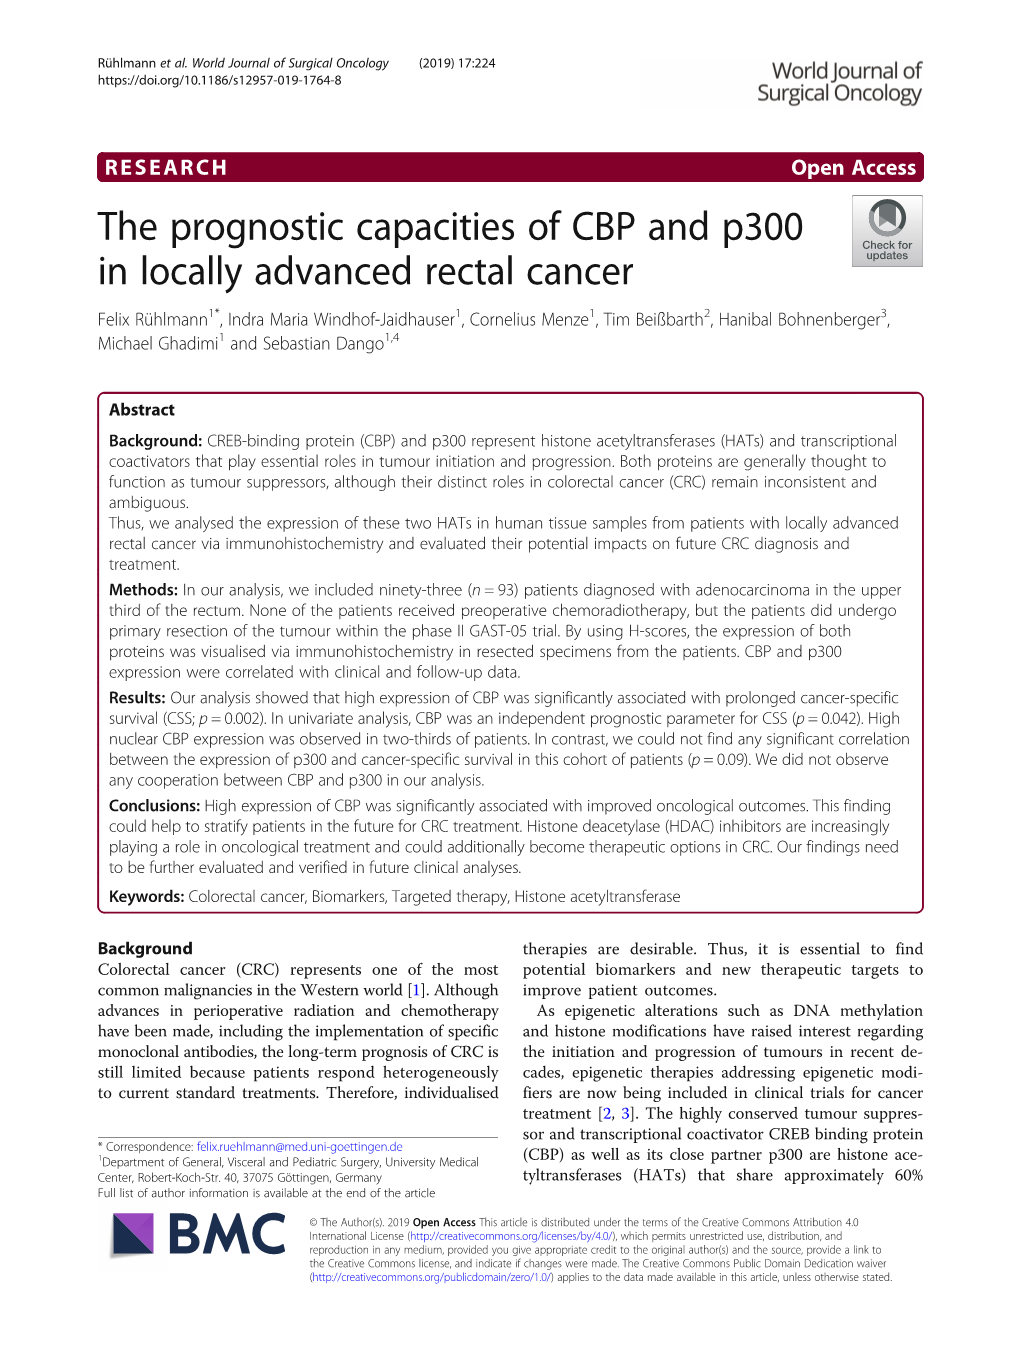 The Prognostic Capacities of CBP and P300 in Locally Advanced Rectal